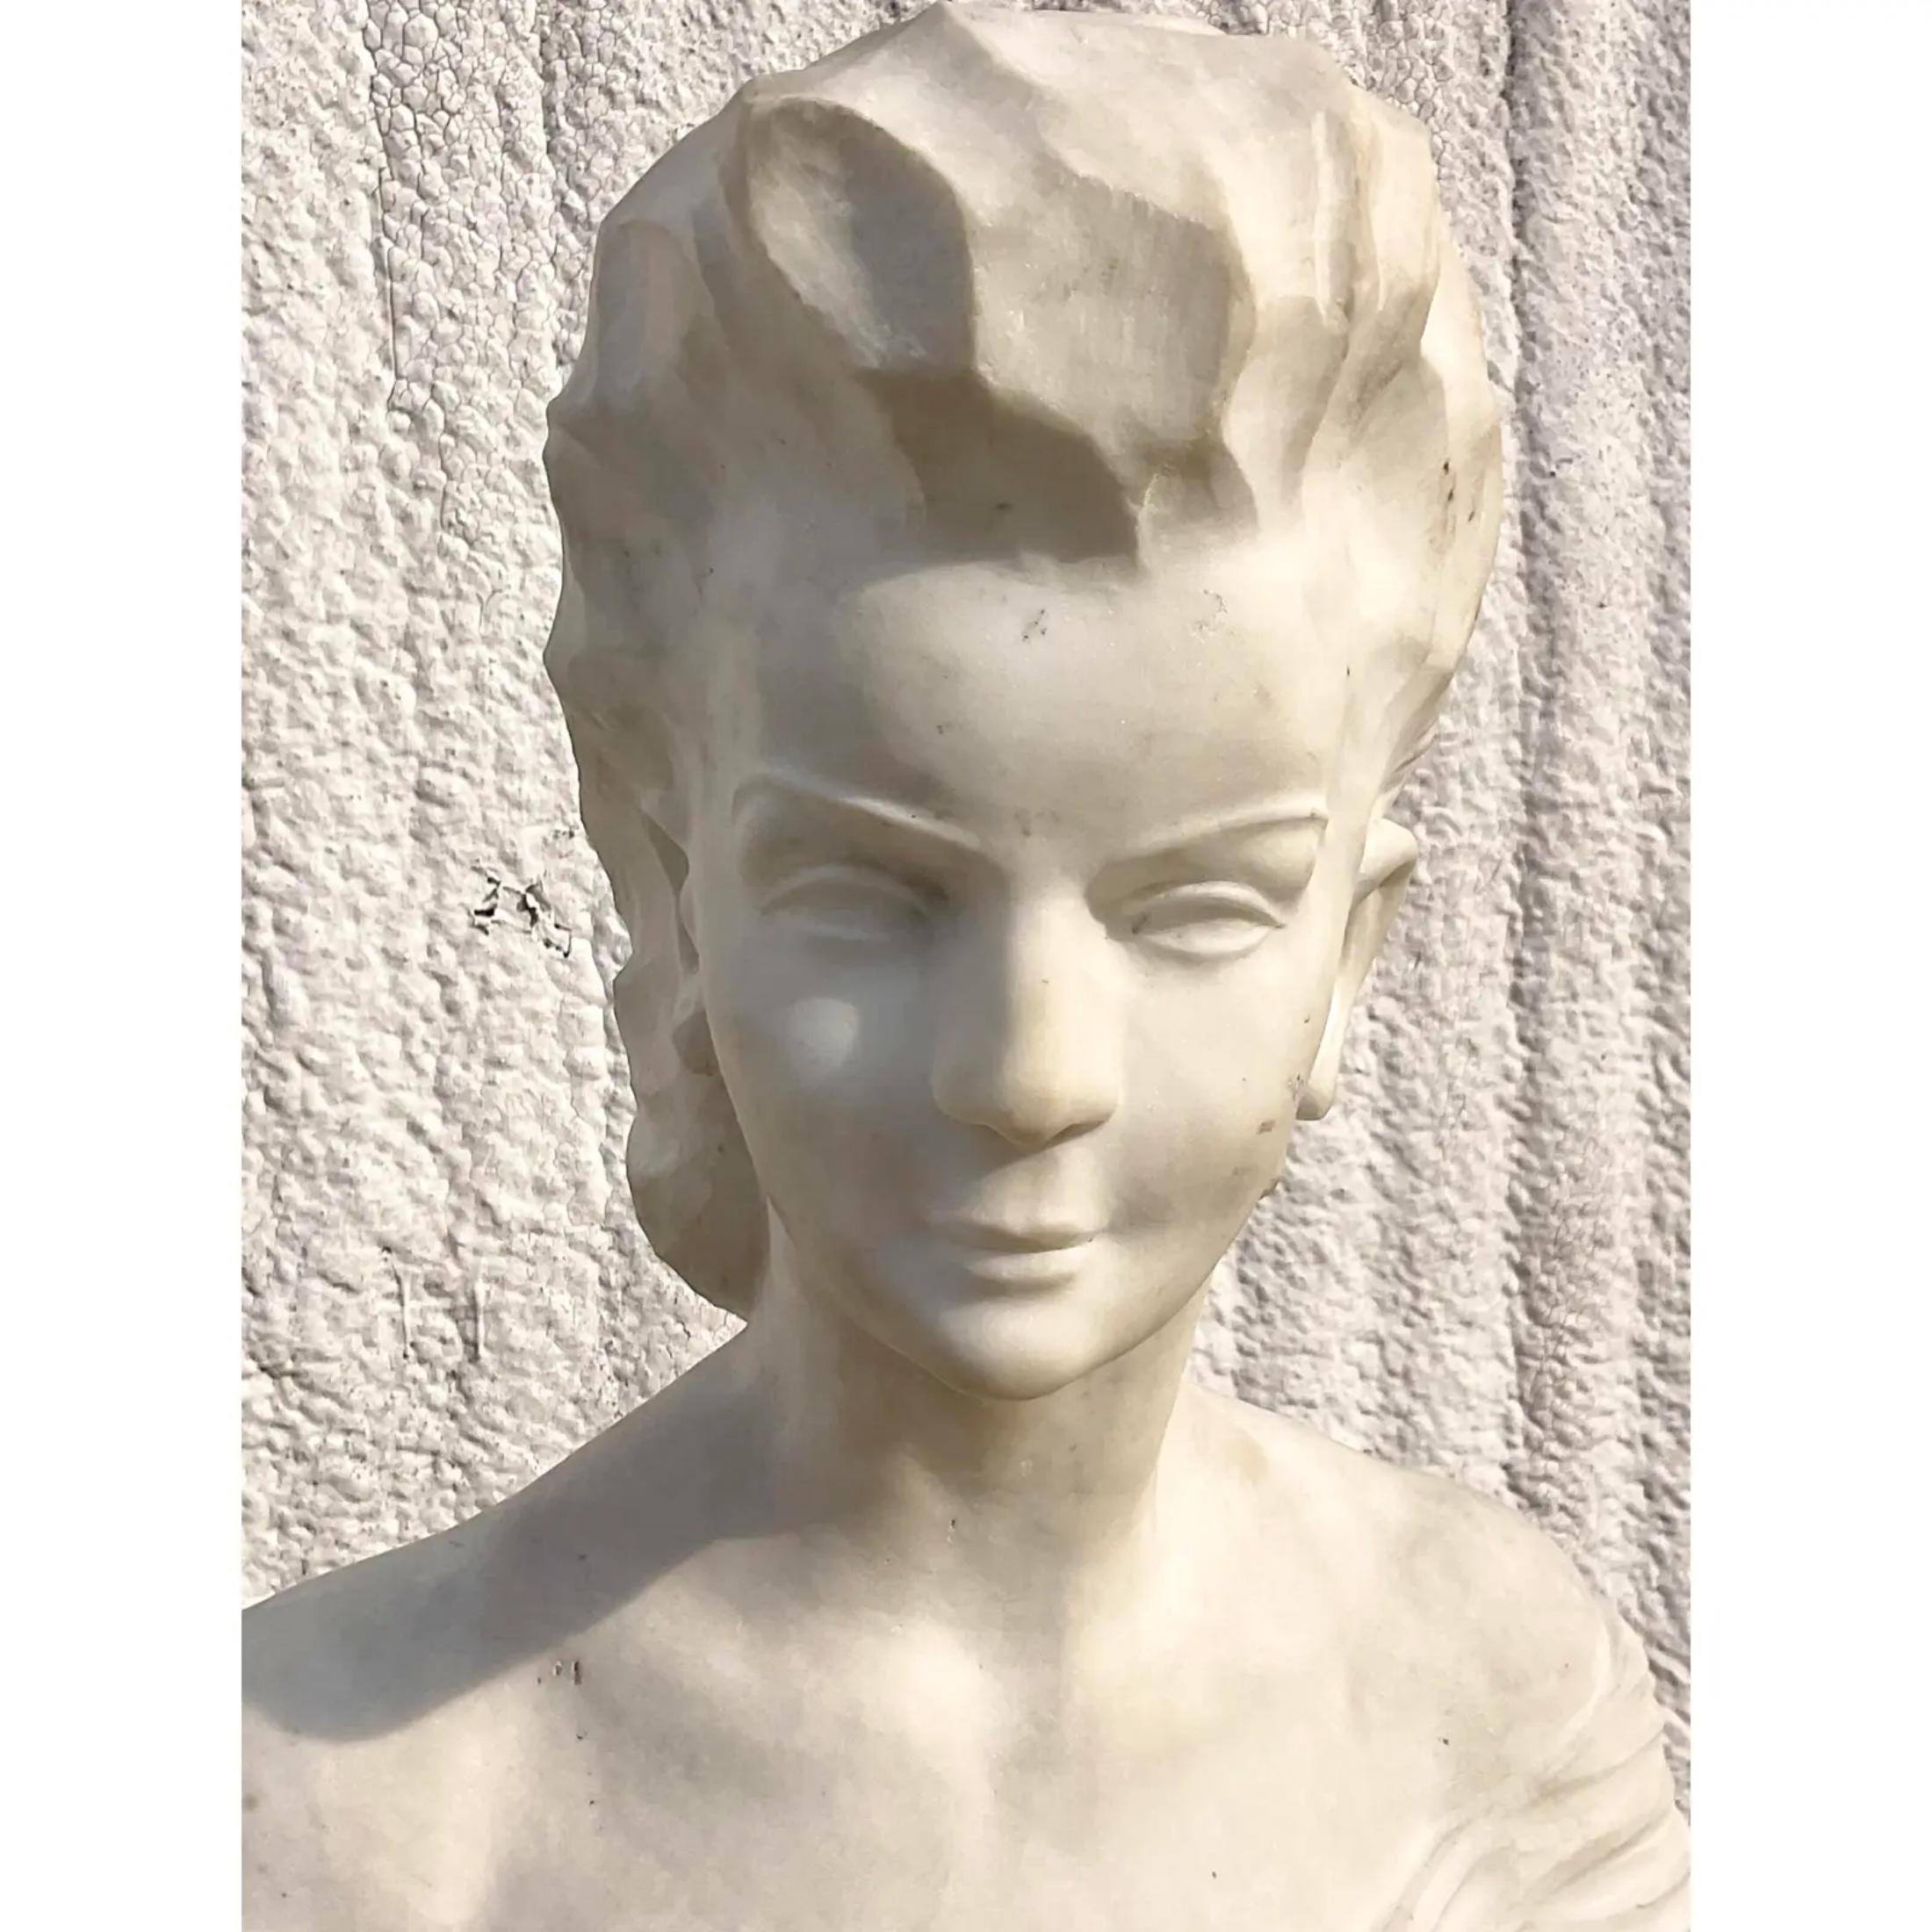 Fantastic vintage stone bust of female. A fabulous vintage woman with a decidedly contemporary look. Rests on a chic marble plinth with gorgeous veining. Acquired from a Miami estate